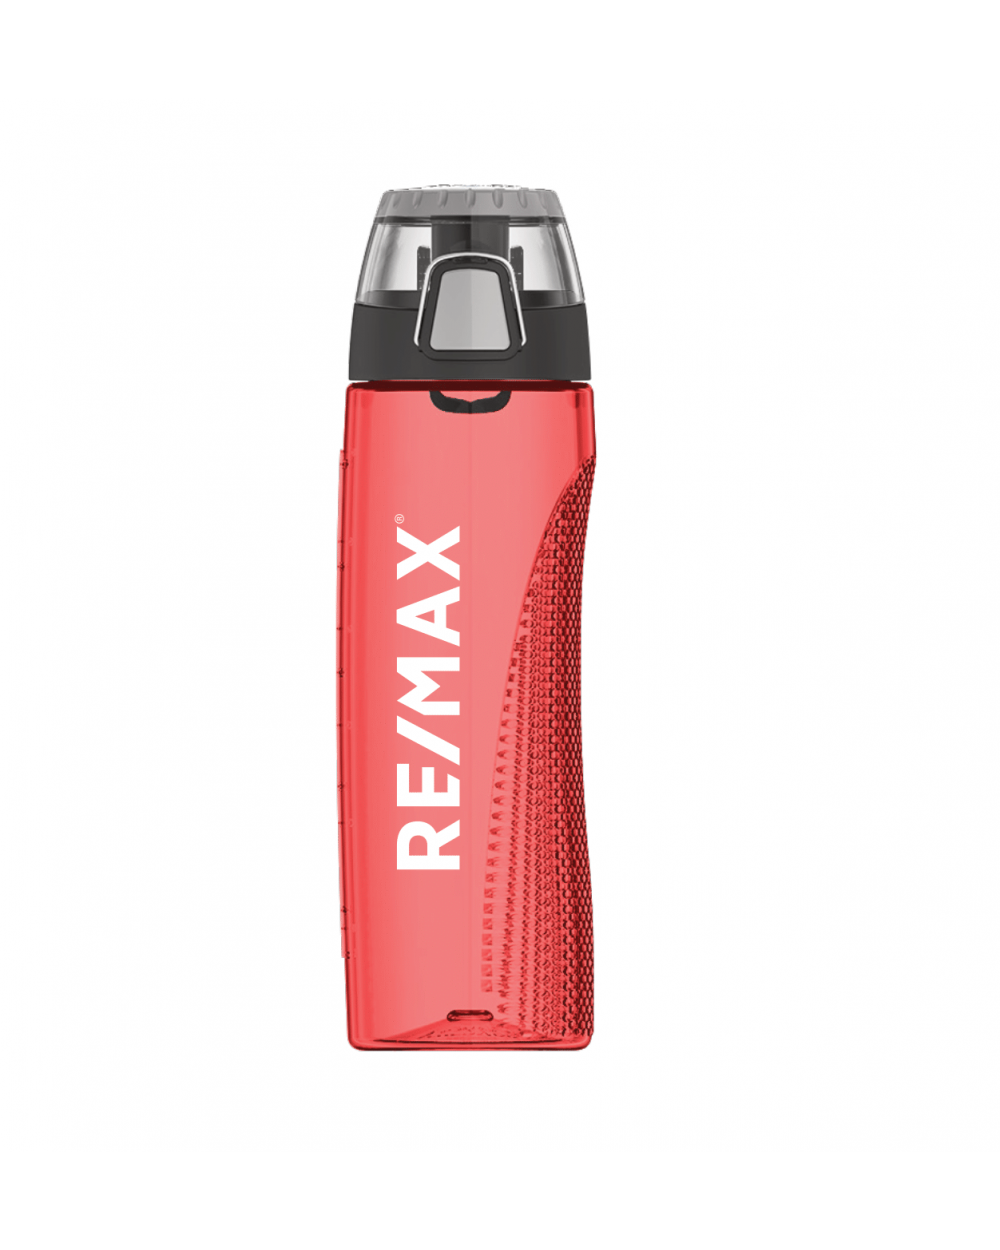 https://remax.blinkswag.com/16447-large_default/24-oz-thermos-hydration-bottle-with-rotating-intake-meter.jpg